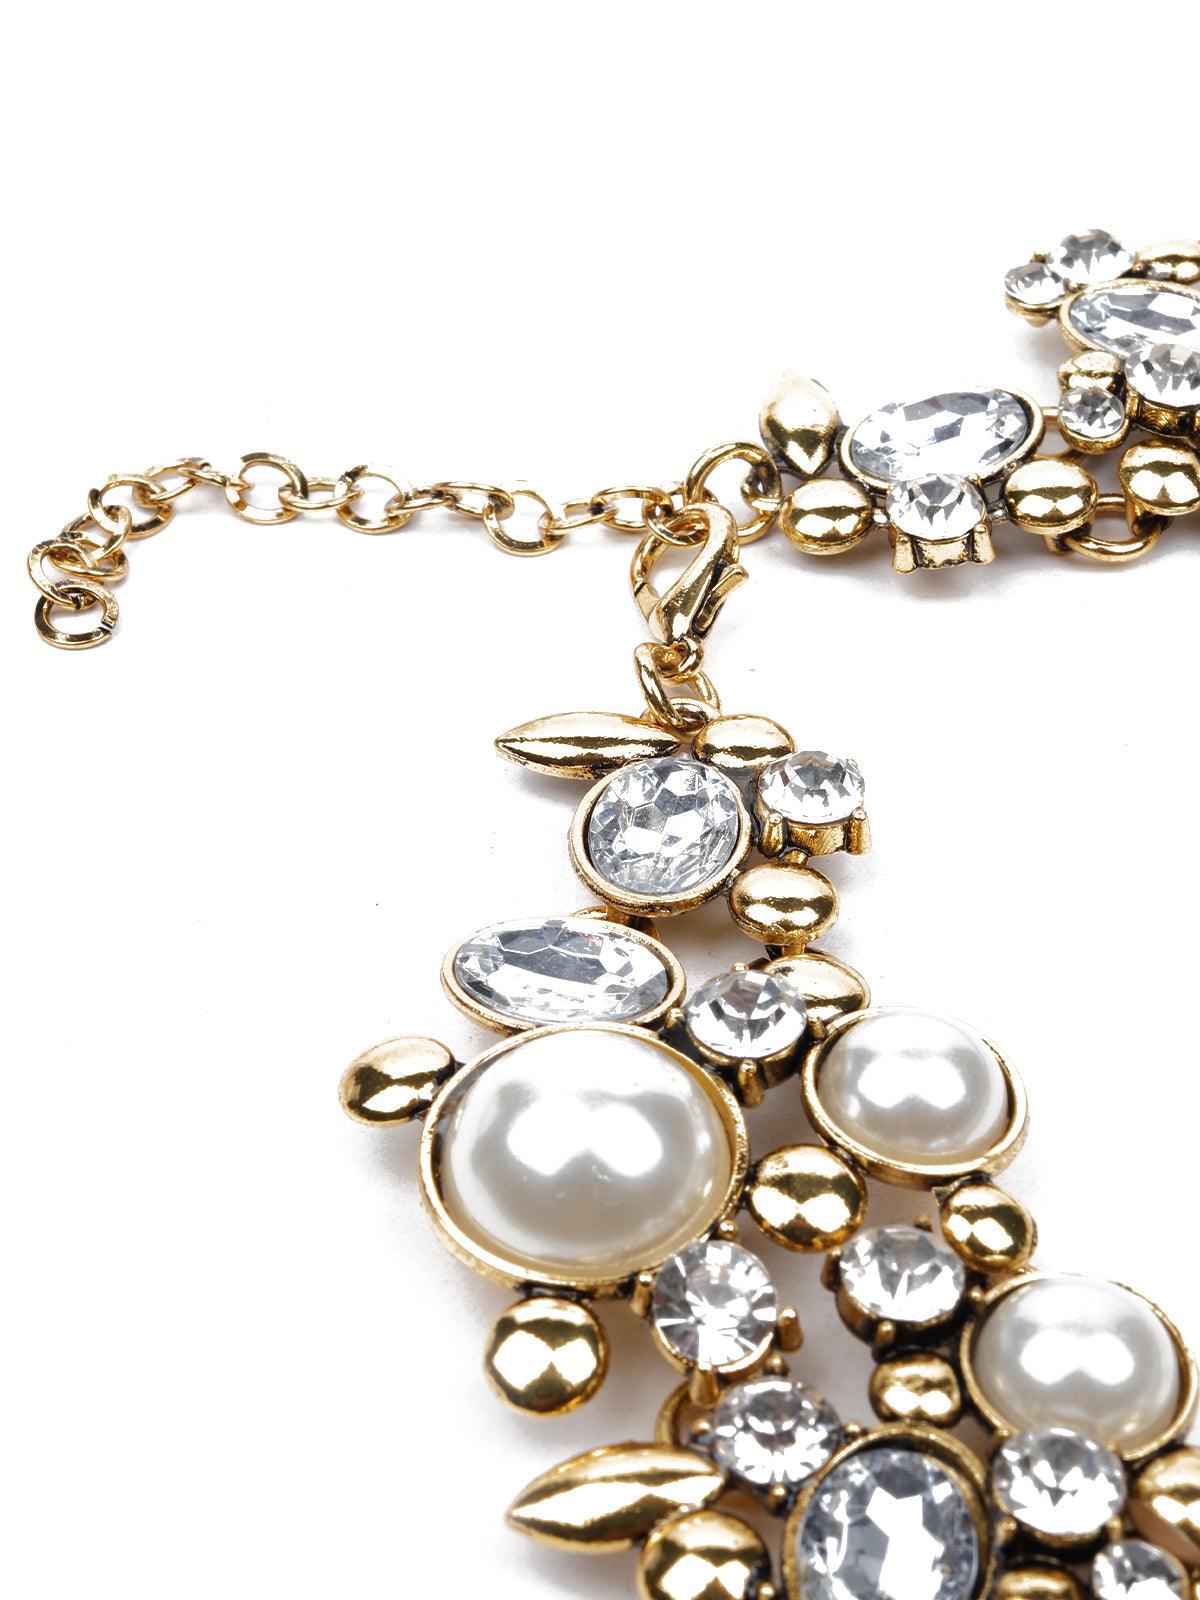 Women's Very Elegant Rounded Embellished With Crystals And Pearls Necklace - Odette